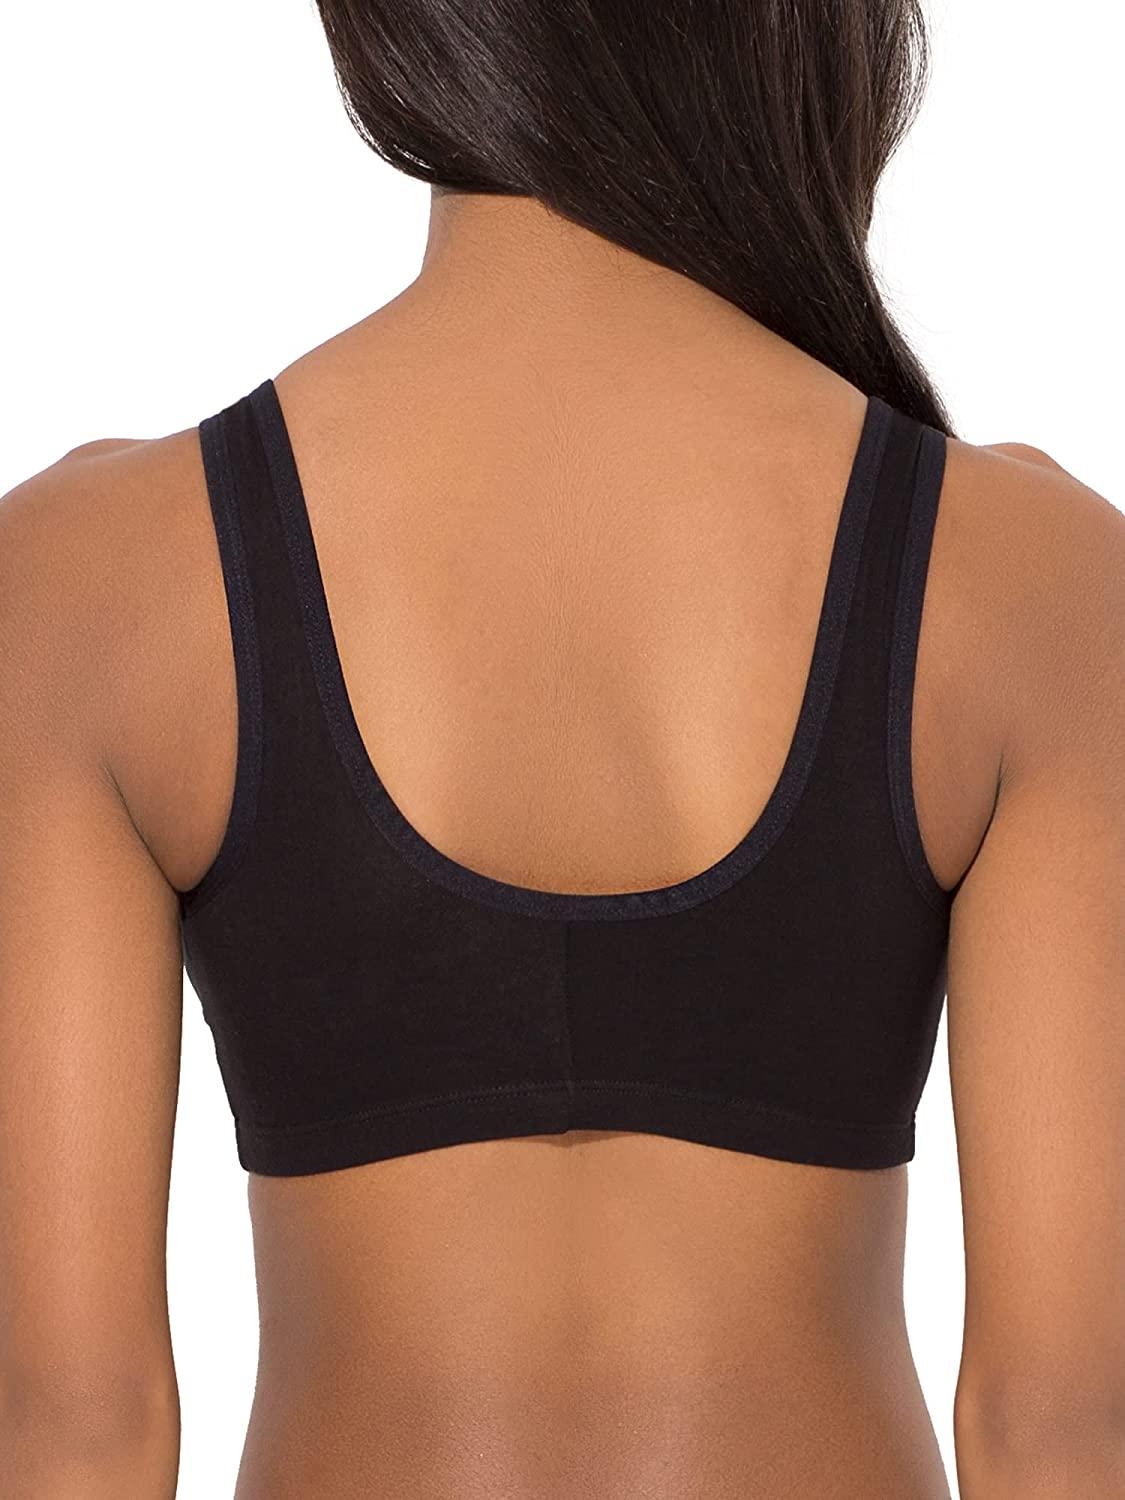 Fruit of the Loom Women's Comfort Front Close Sport Bra With Mesh